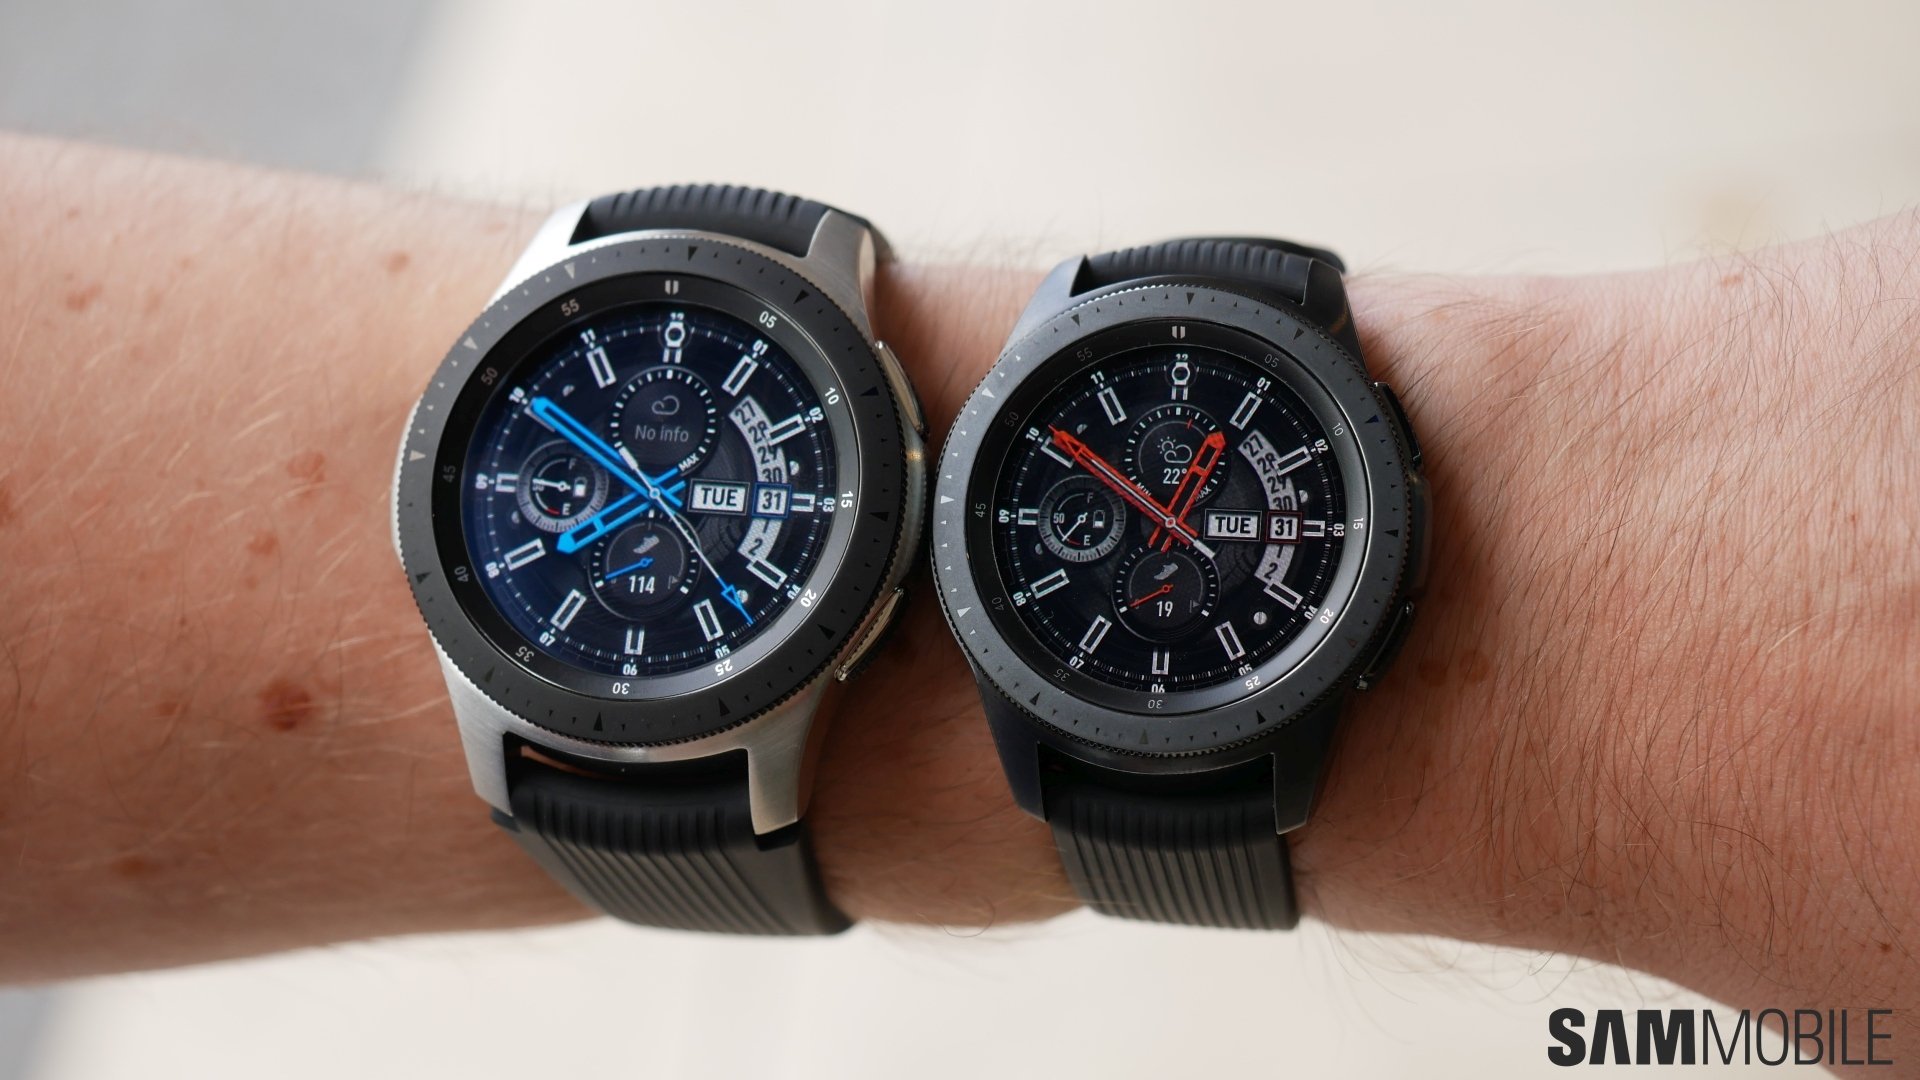 Samsung Galaxy Watch hands-on impressions - Free Apps